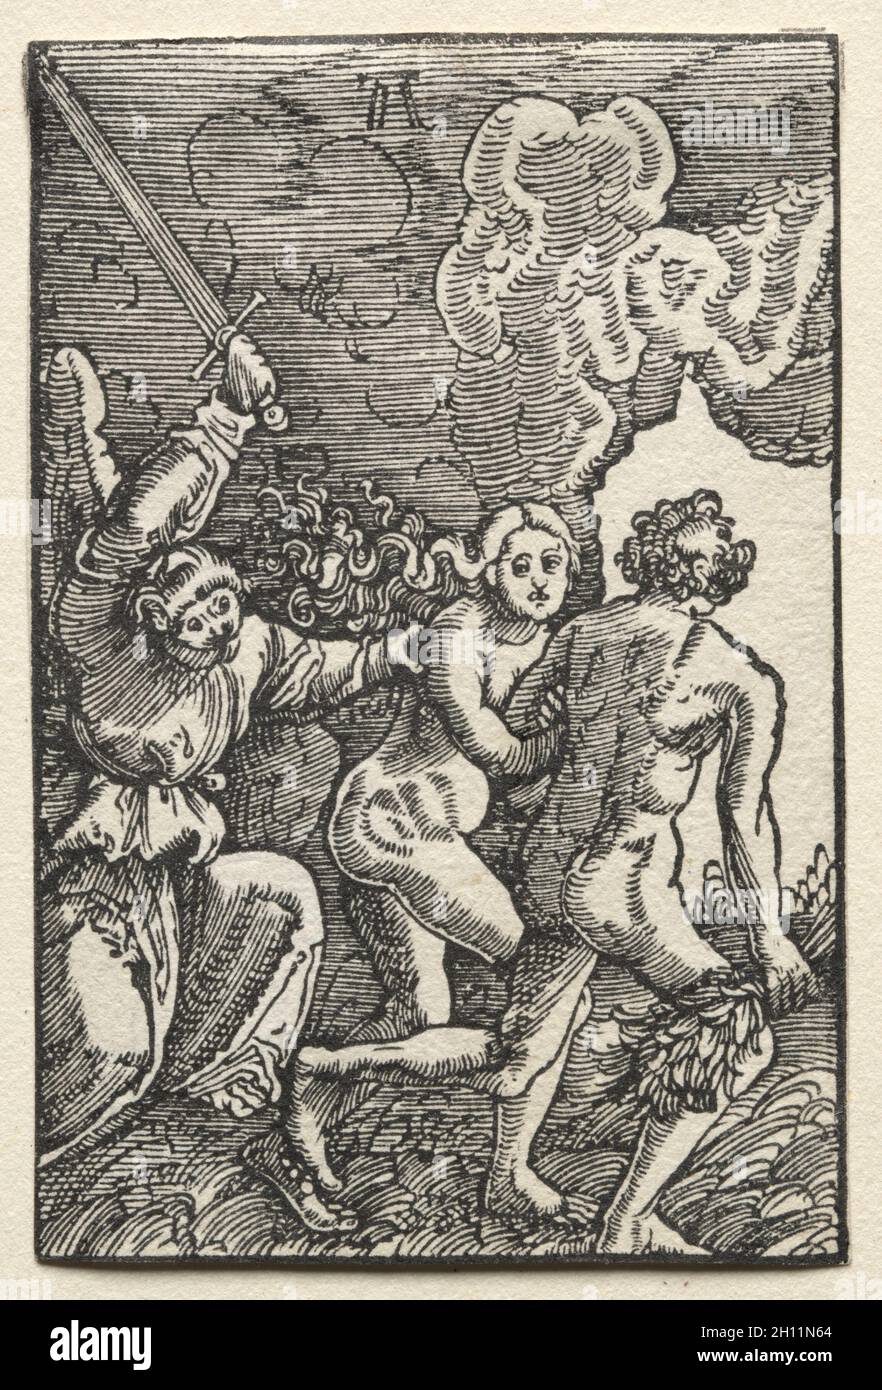 The Fall and Redemption of Man: The Expulsion from Eden, c. 1515. Albrecht Altdorfer (German, c. 1480-1538). Woodcut; Stock Photo